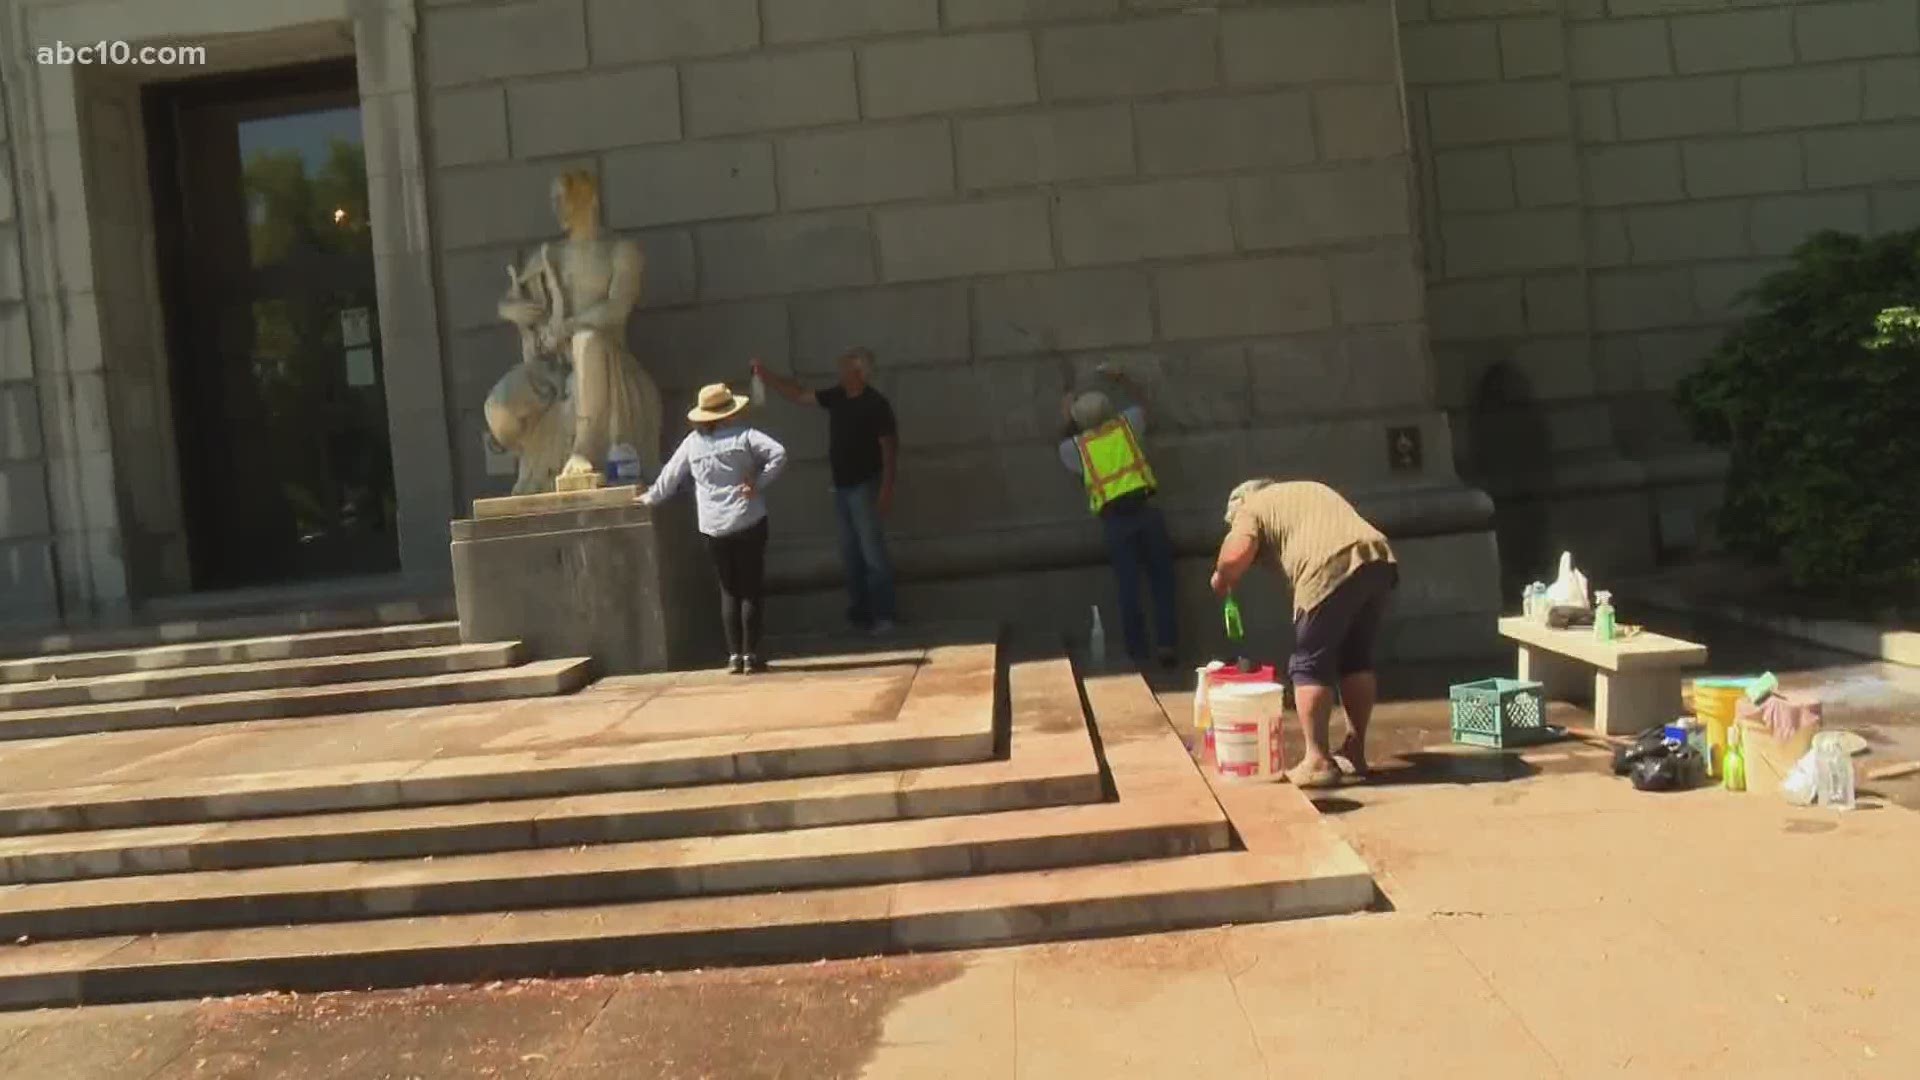 In another outpouring of support for the community, large groups of volunteers again descended on Downtown Sacramento to clean up after another night of vandalism.